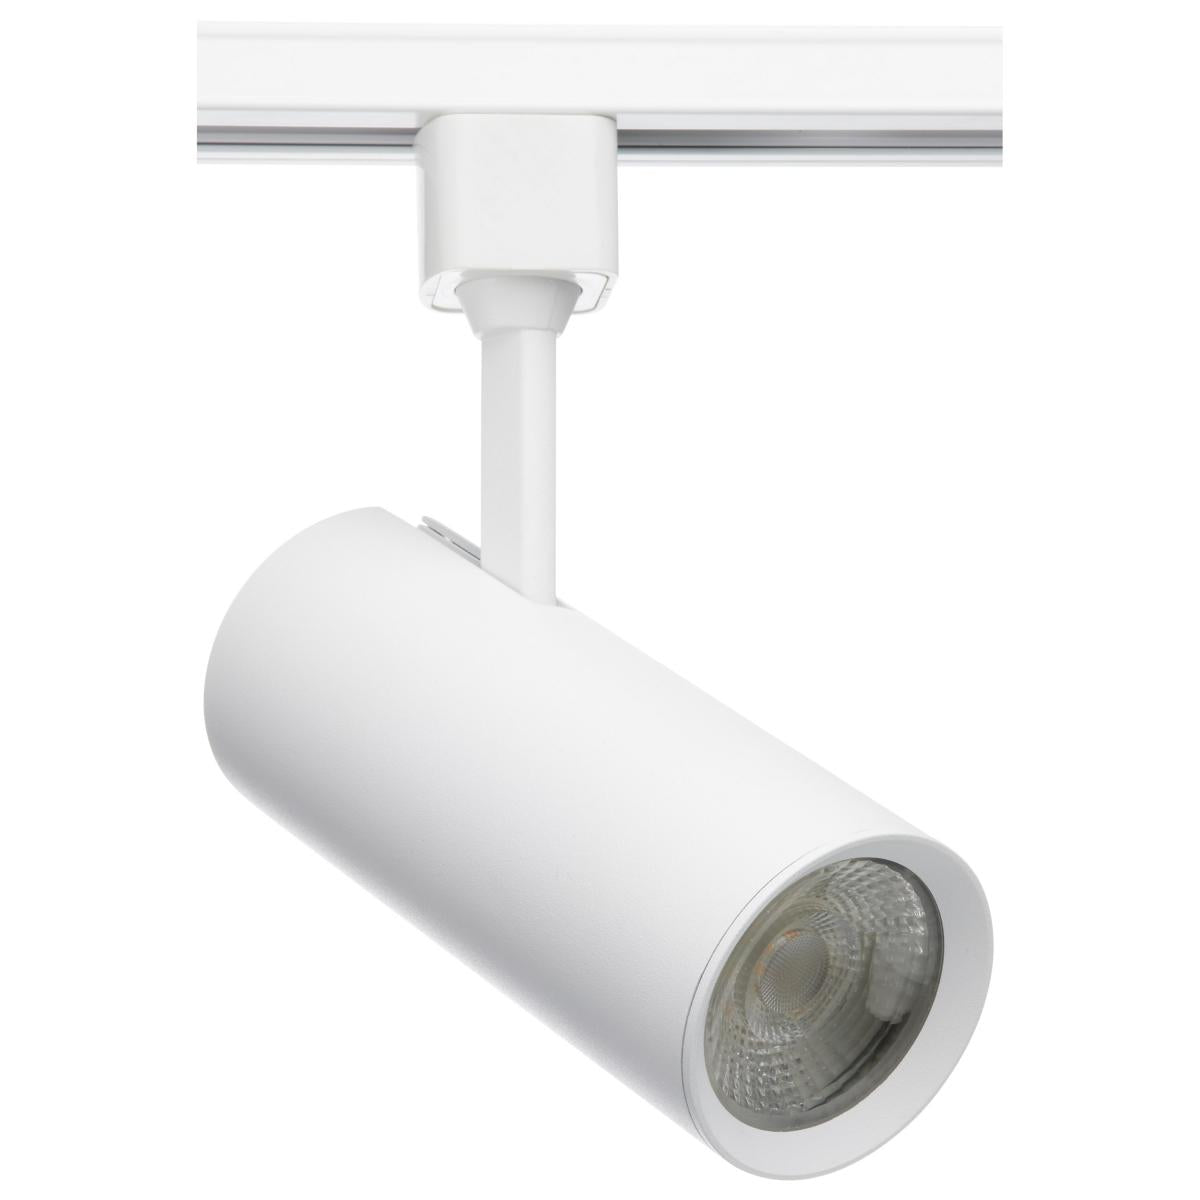 Pro LED Commercial Track Head, 20W, 3000K, 1200 Lumens, Halo (H) - Bees Lighting